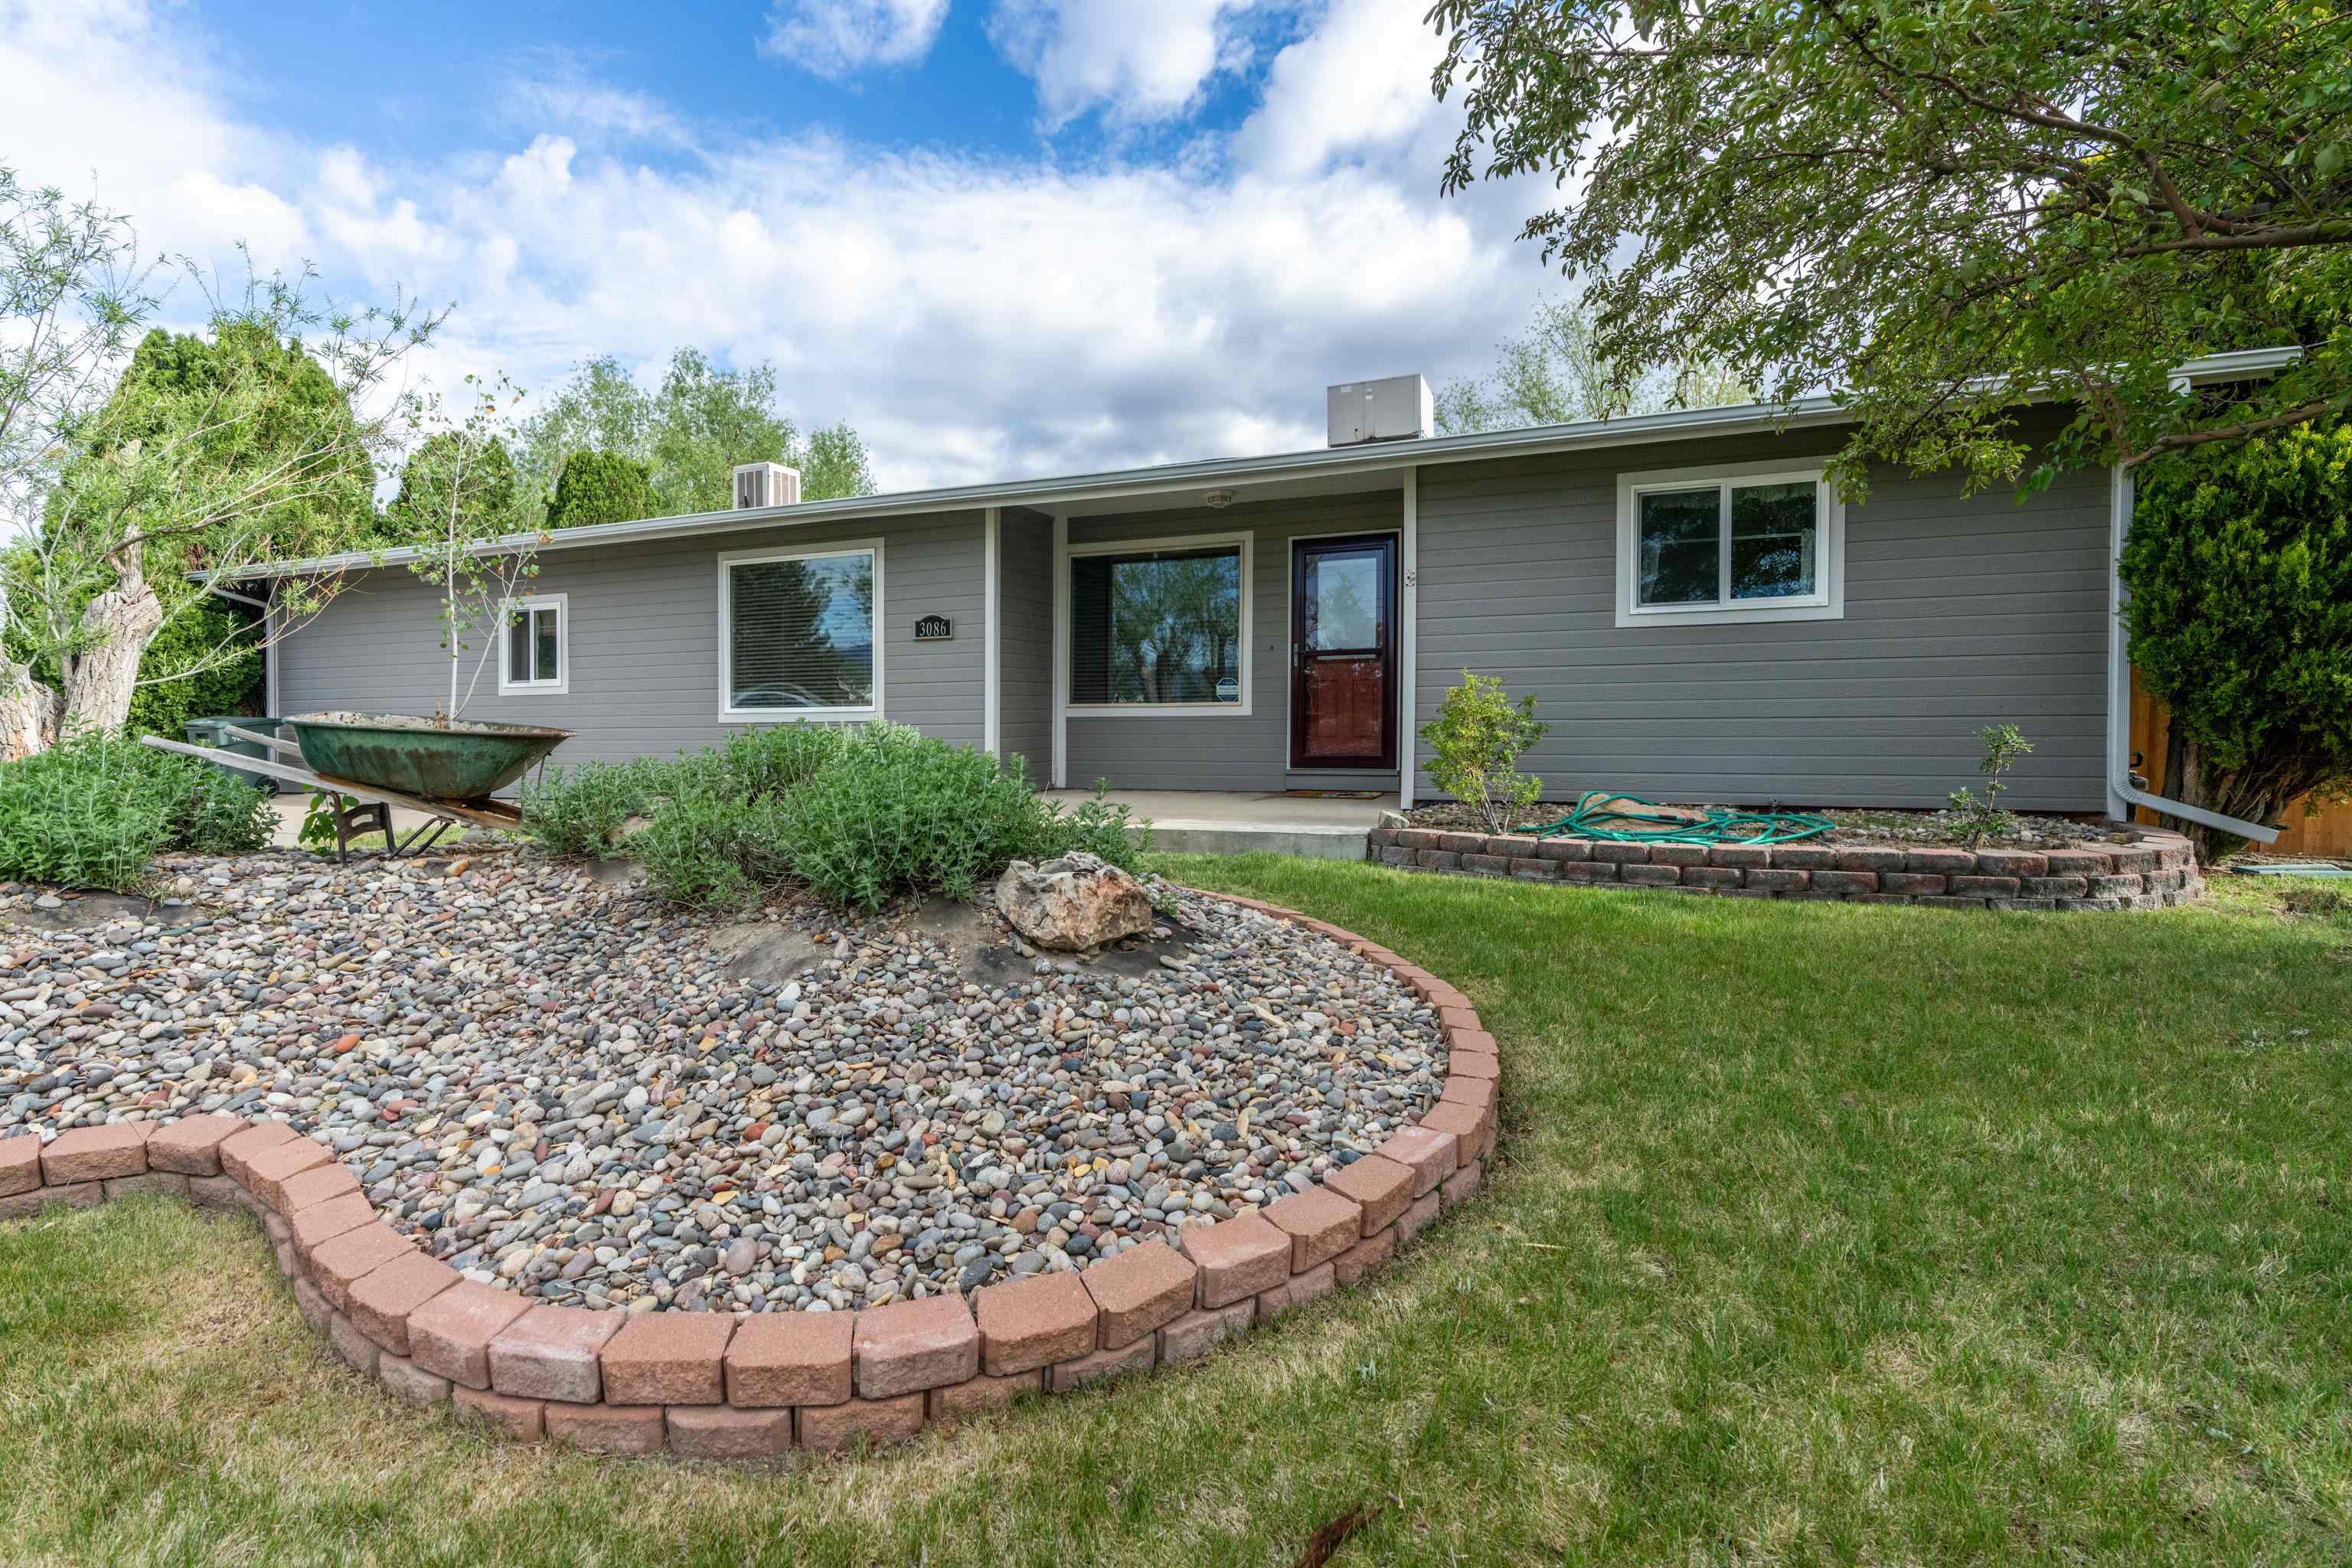 OPEN HOUSE! Sunday, July 28th from 11:30 AM - 1:30 PM Hobby farm with ample parking and room for RV and toys on 1.47 acres. As an added bonus the RSF-4 property may have the potential for an Accessory Dwelling Unit (ADU) or to be subdivided! Come see this updated ranch-style home, featuring a brand new roof, energy-efficient vinyl windows, new dishwasher, fresh exterior paint and deluxe chicken set up. Step inside to find tongue and groove accents that bring warmth and style. The detached garage offers additional storage, while the heated and cooled detached bonus room (not counted in square footage) is an ideal craftroom, office, gym, or classroom. Come experience country living while still being conveniently located near amenities! Seller offering $10,000 towards interest rate buy down for a huge cost savings to buyer!